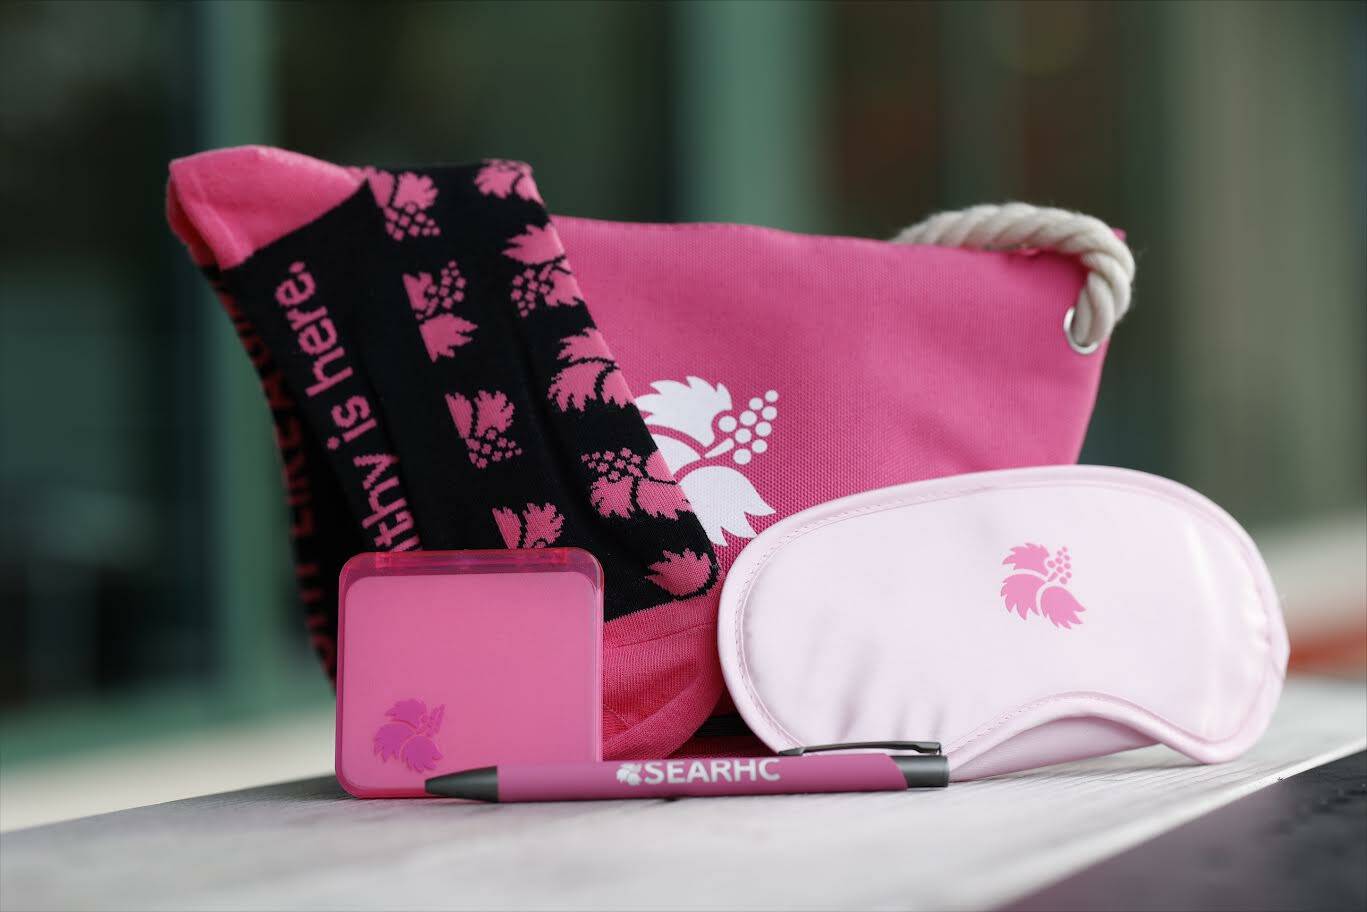 SouthEast Alaska Regional Health Consortium is offering a promotion this month to provide 3D mammograms with no out-of-pocket cost to patients who book an appointment at one of its multiple clinics across Southeast Alaska. A free swag bag is also given to patients when appointment is booked during October. (Courtesy / SEARHC)